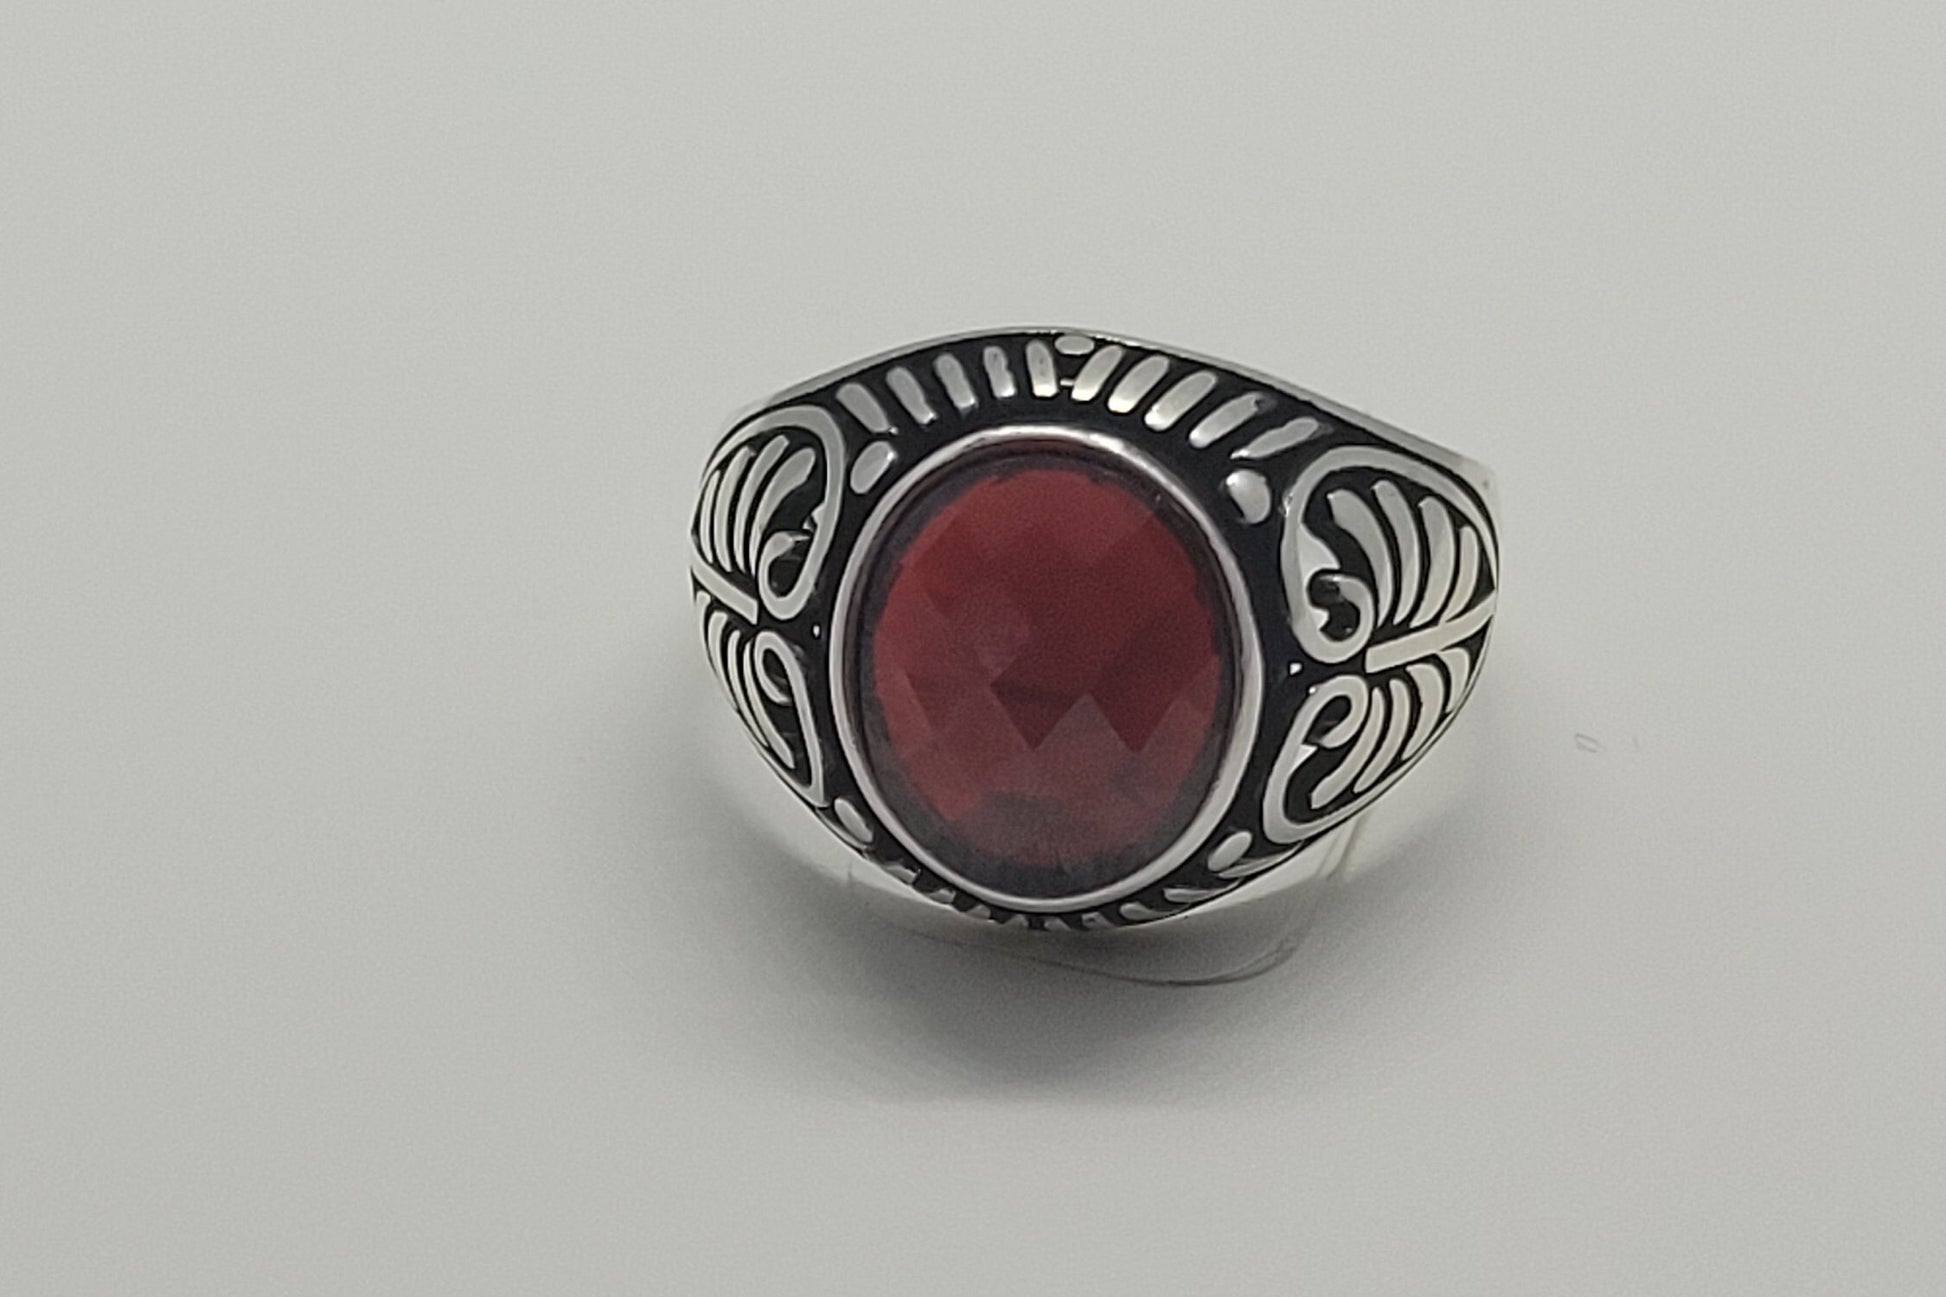 Vintage Ruby Glass Mens Ring in 925 Sterling Silver Persian Styled with Ruby Glass